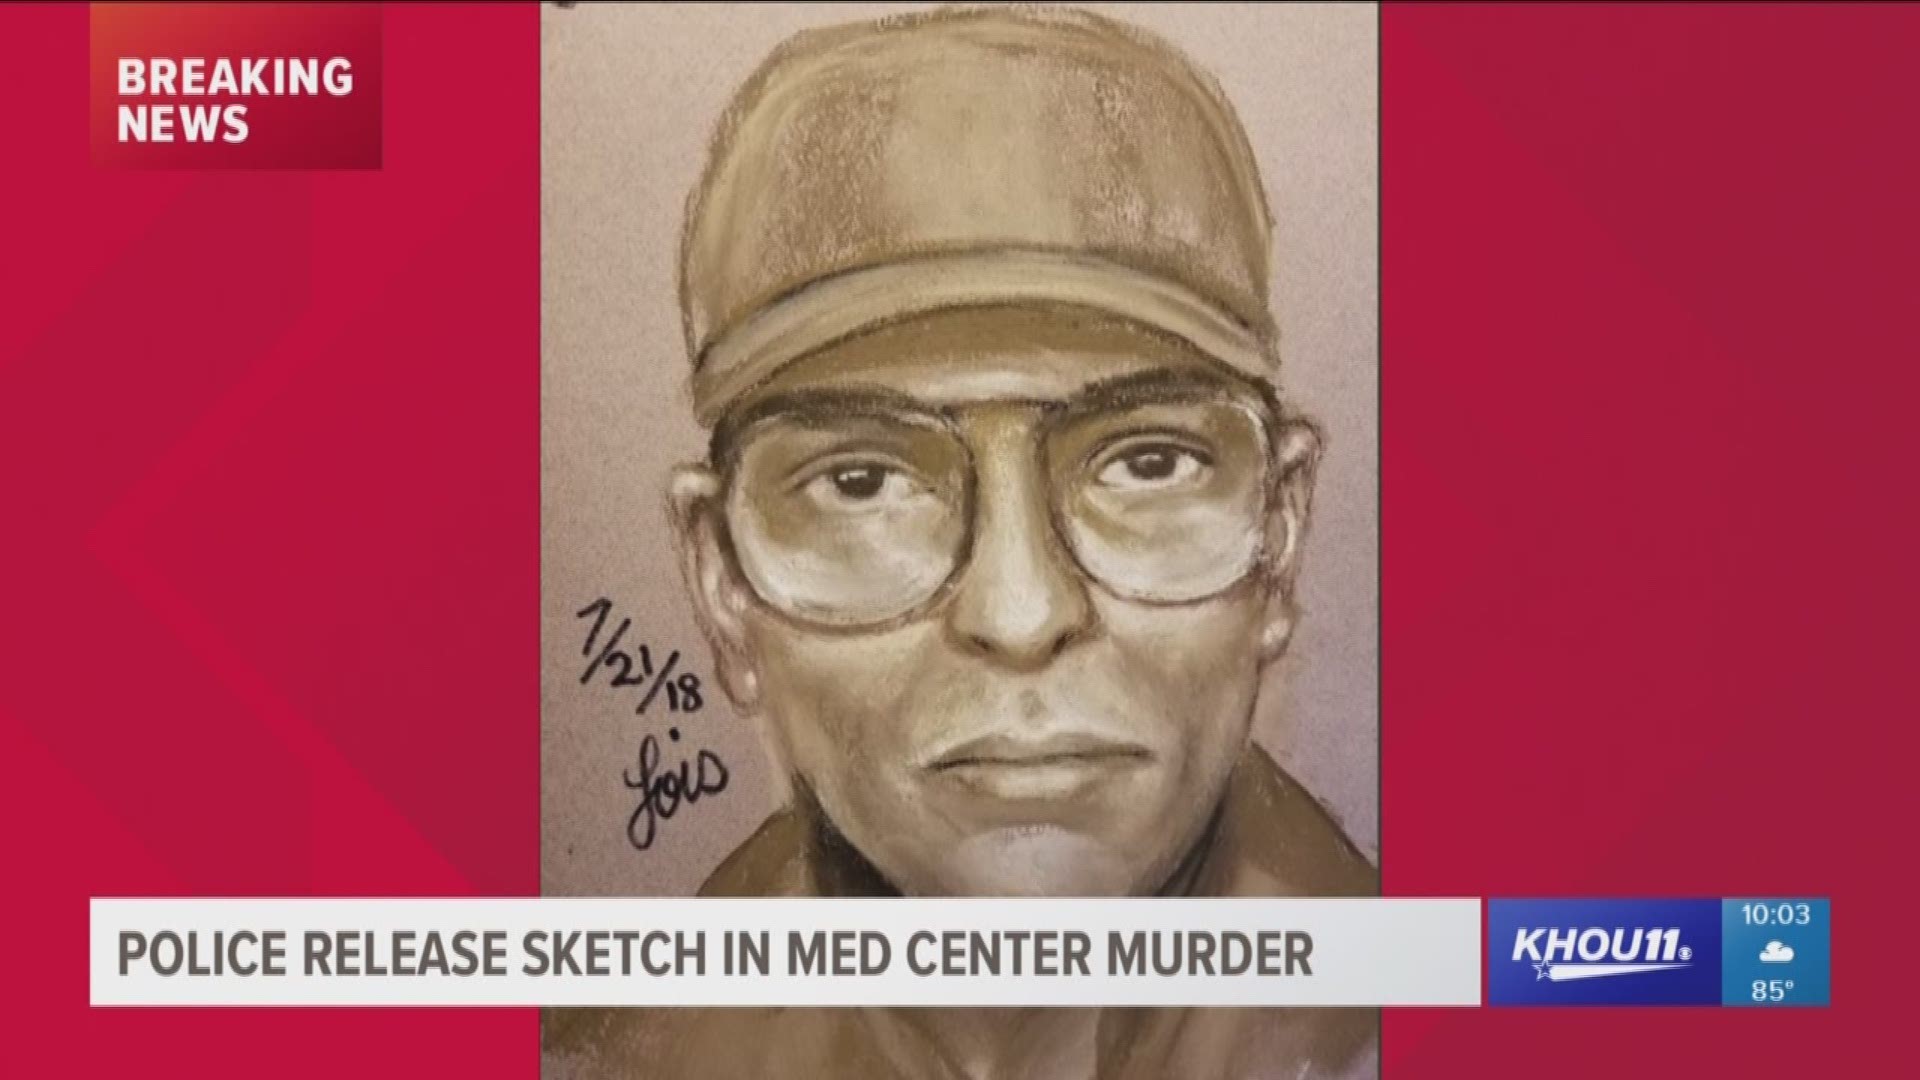 Houston police have released the face of the man they say shot and killed a well-known cardiologist.